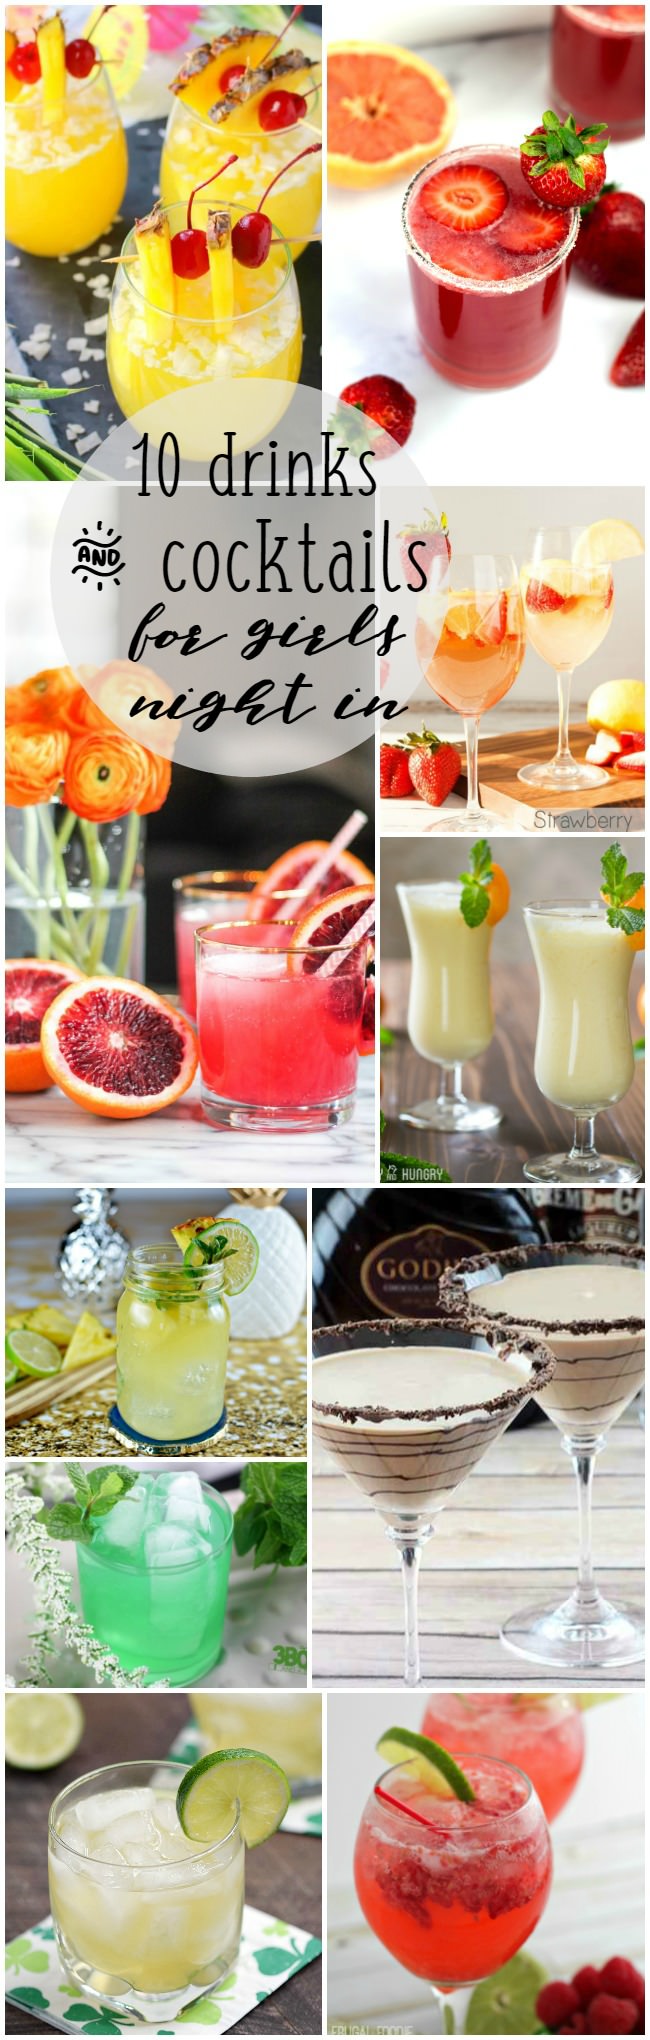 Cheers to you and connecting with your girlfriends! Here's 10 Drinks and Cocktails for Girls Night In. There's something for everyone here. 